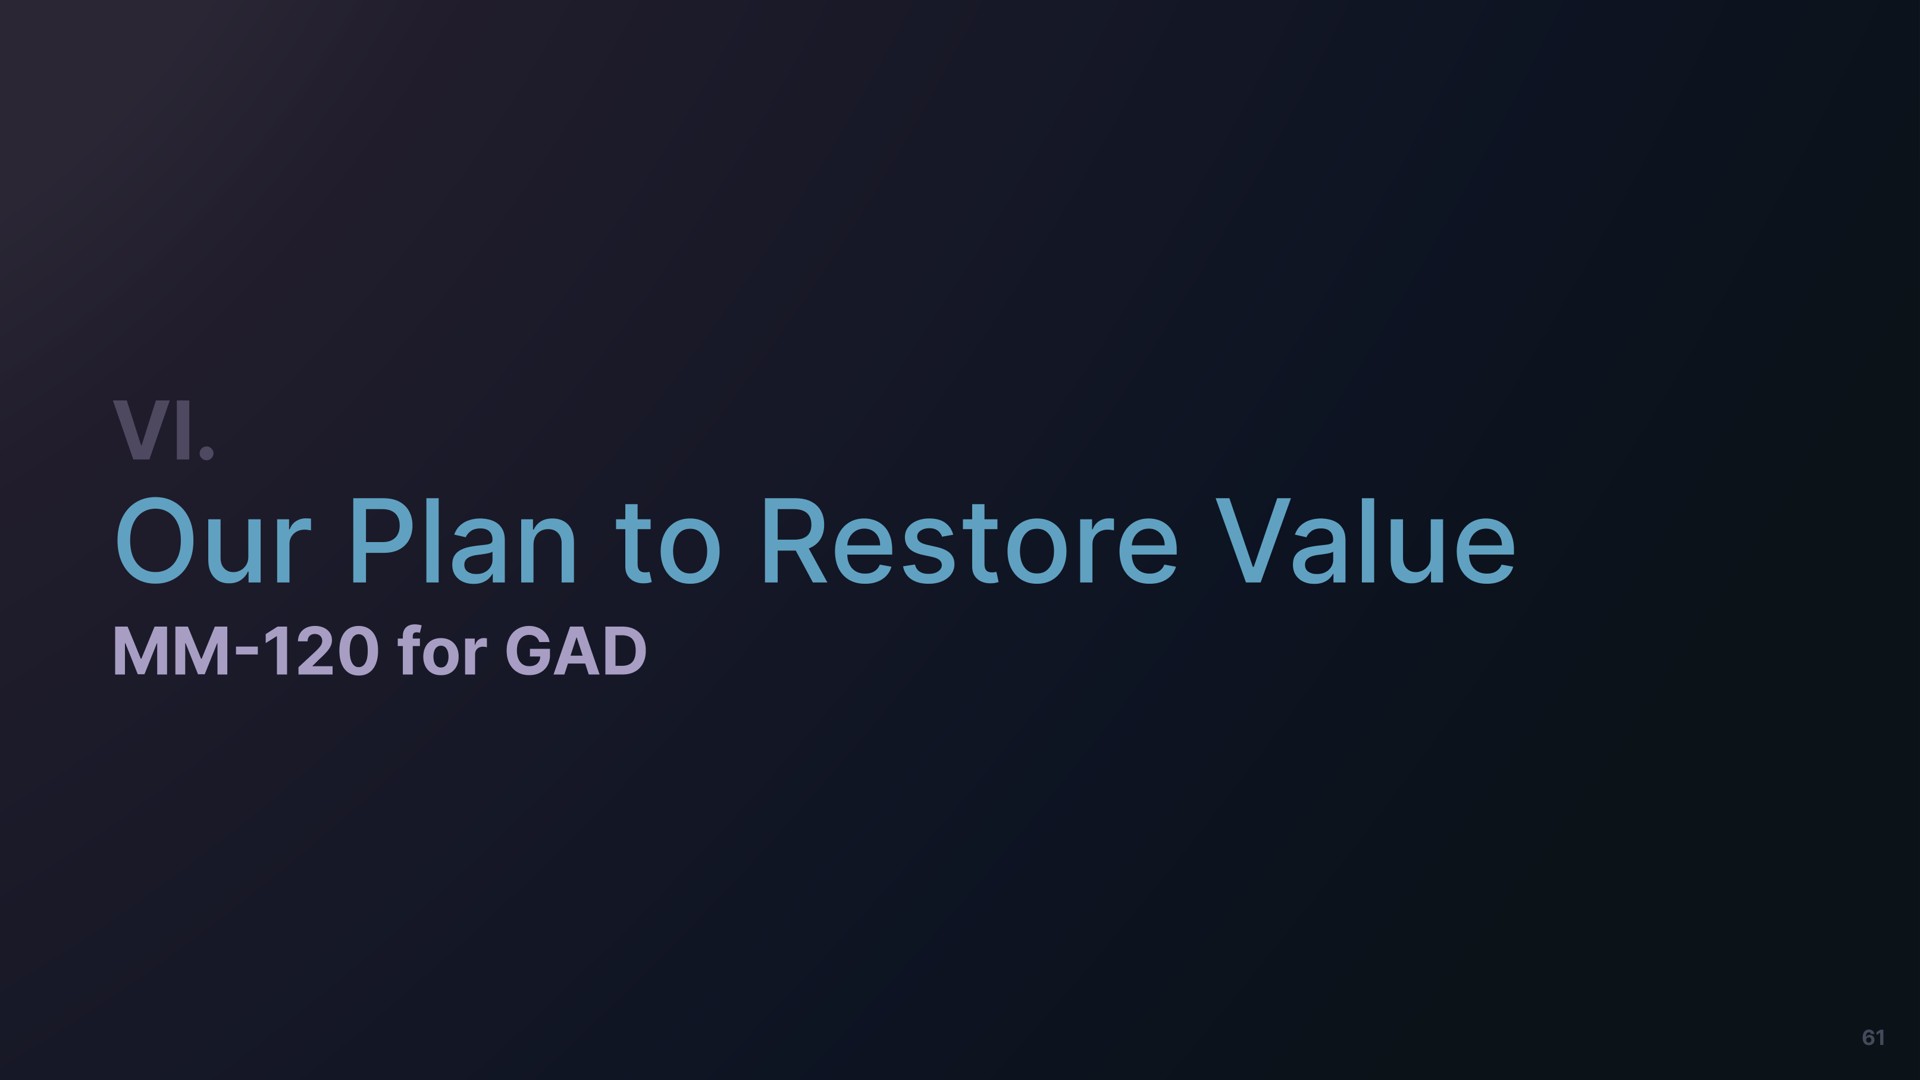 our plan to restore value our plan to restore value for gad for gad | Freeman Capital Management